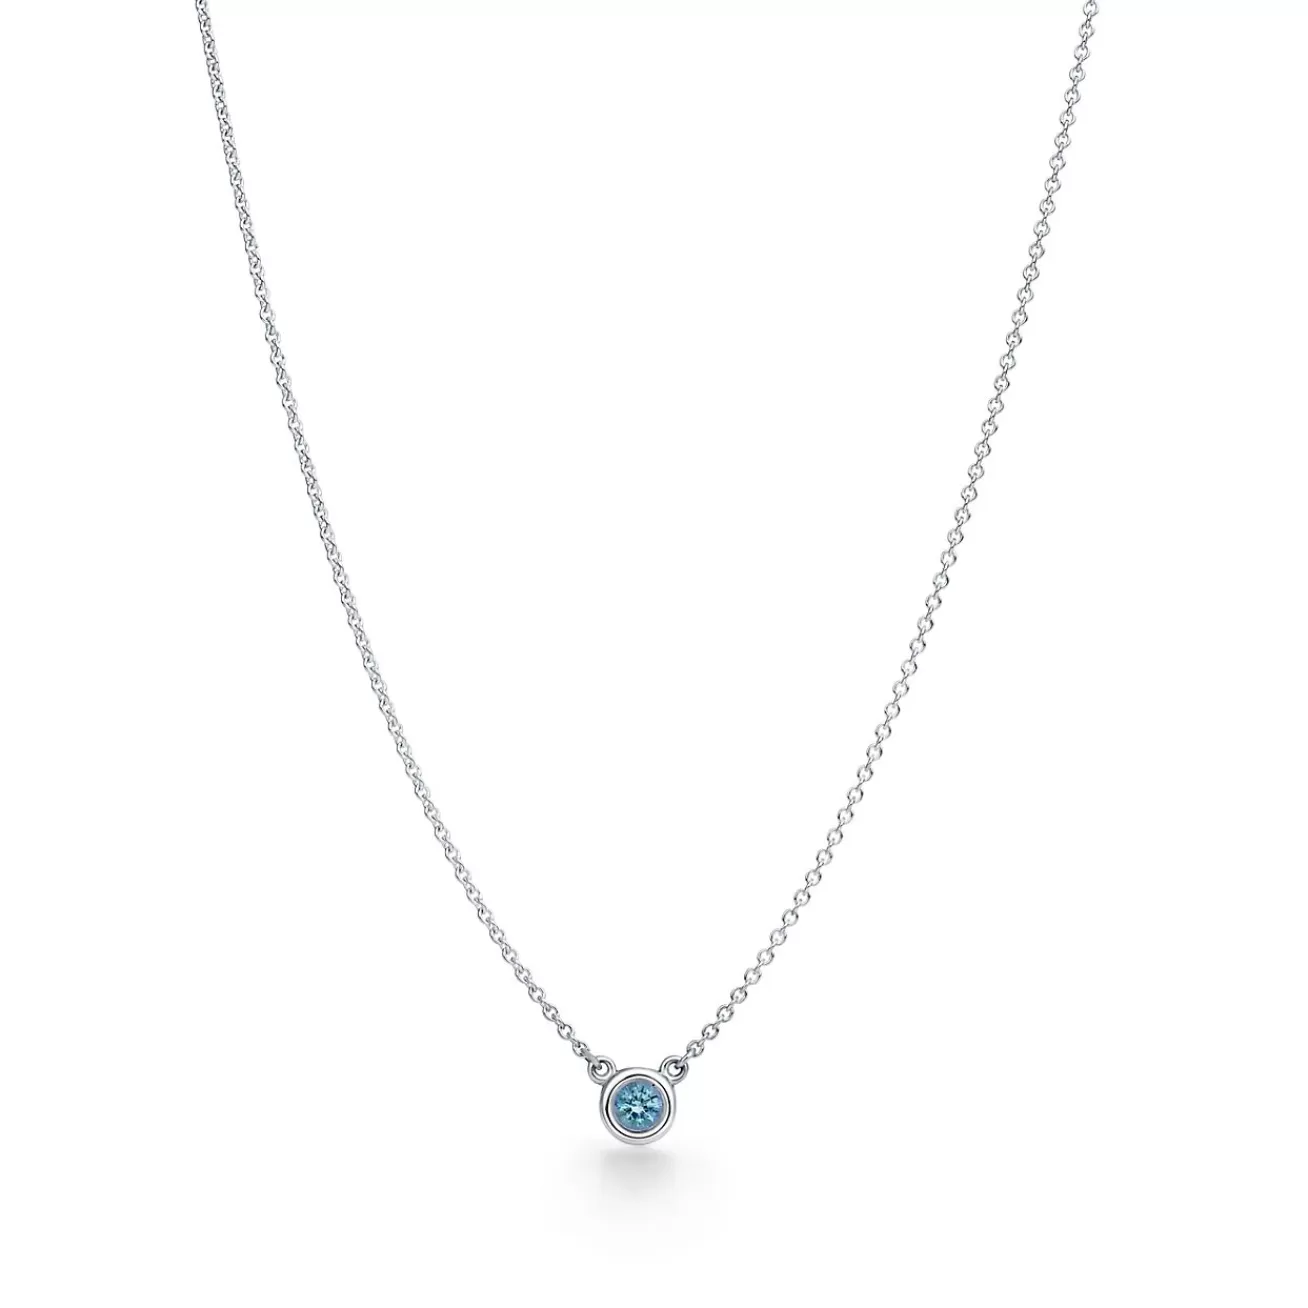 Tiffany & Co. Elsa Peretti® Color by the Yard Aquamarine Pendant in Silver | ^ Necklaces & Pendants | Gifts for Her